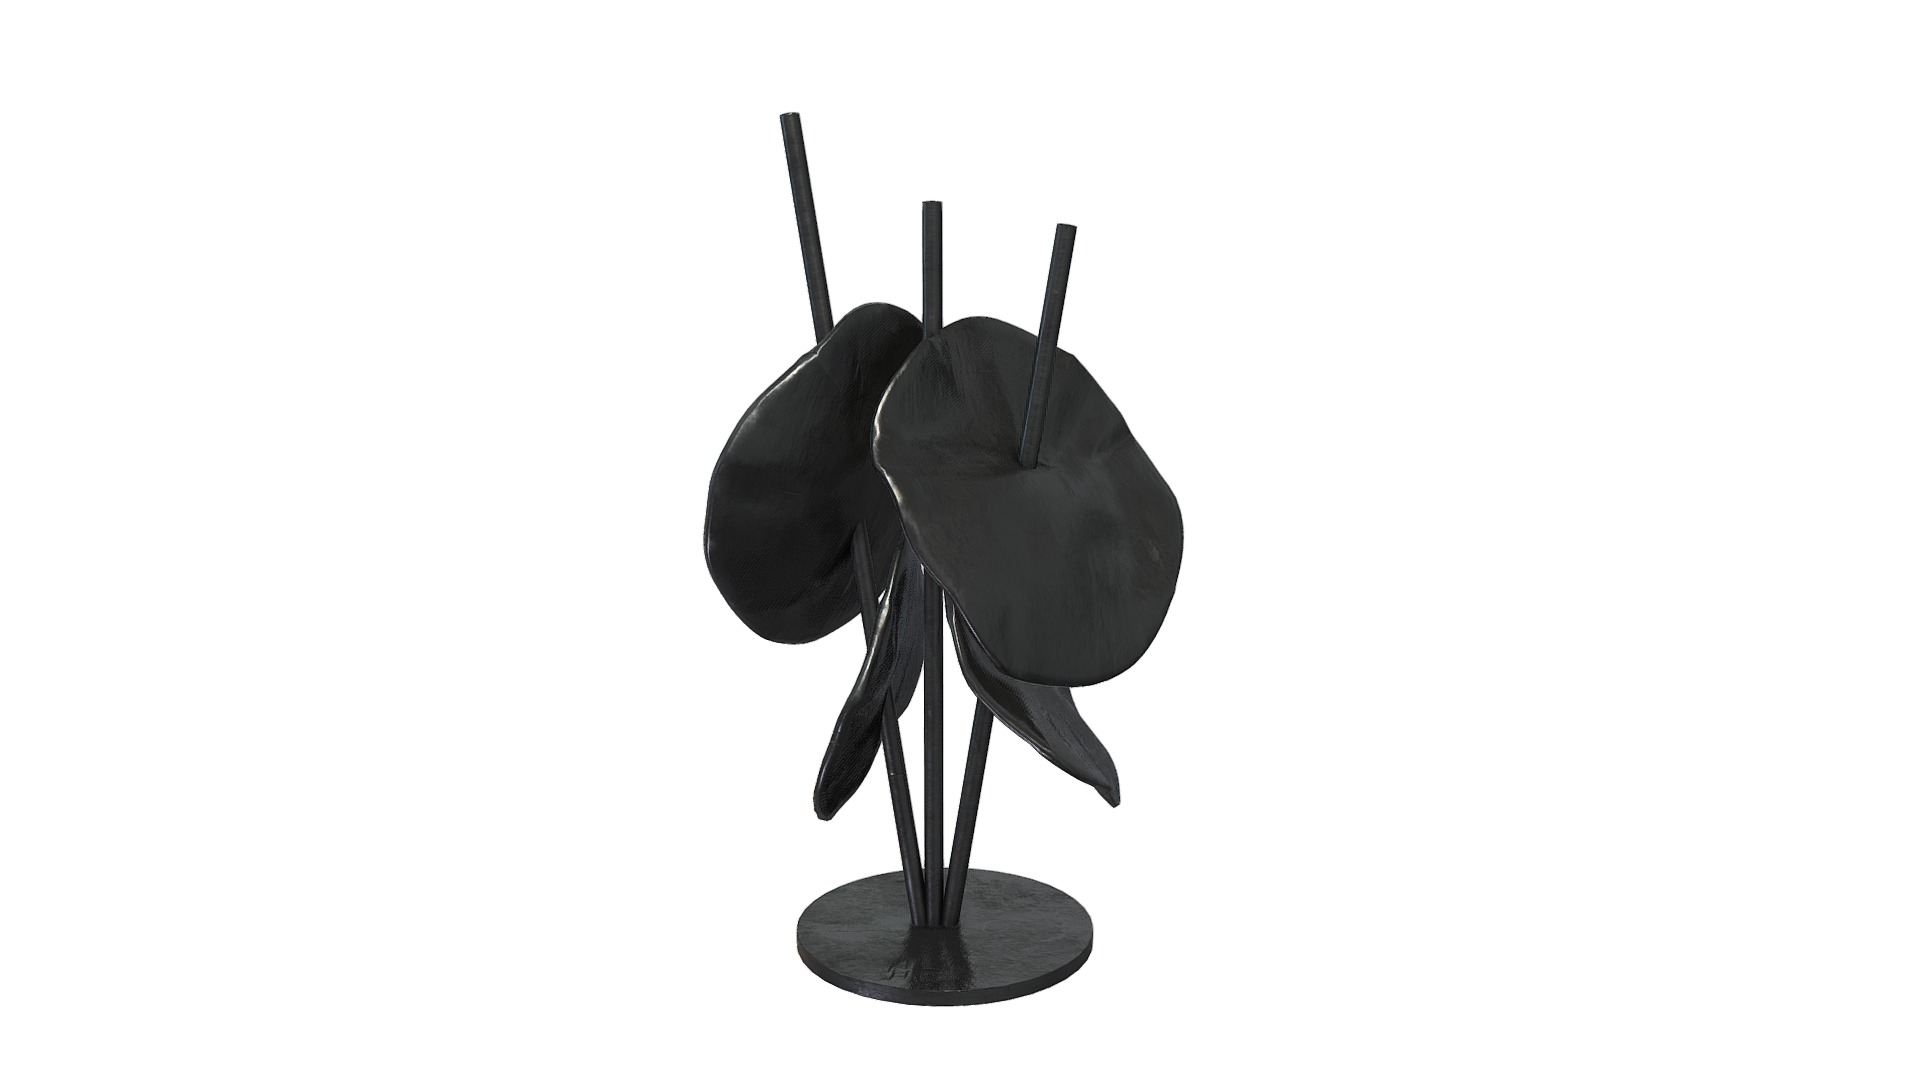 3D model Tortas Fritas - This is a 3D model of the Tortas Fritas. The 3D model is about a black and white photo of a lamp.